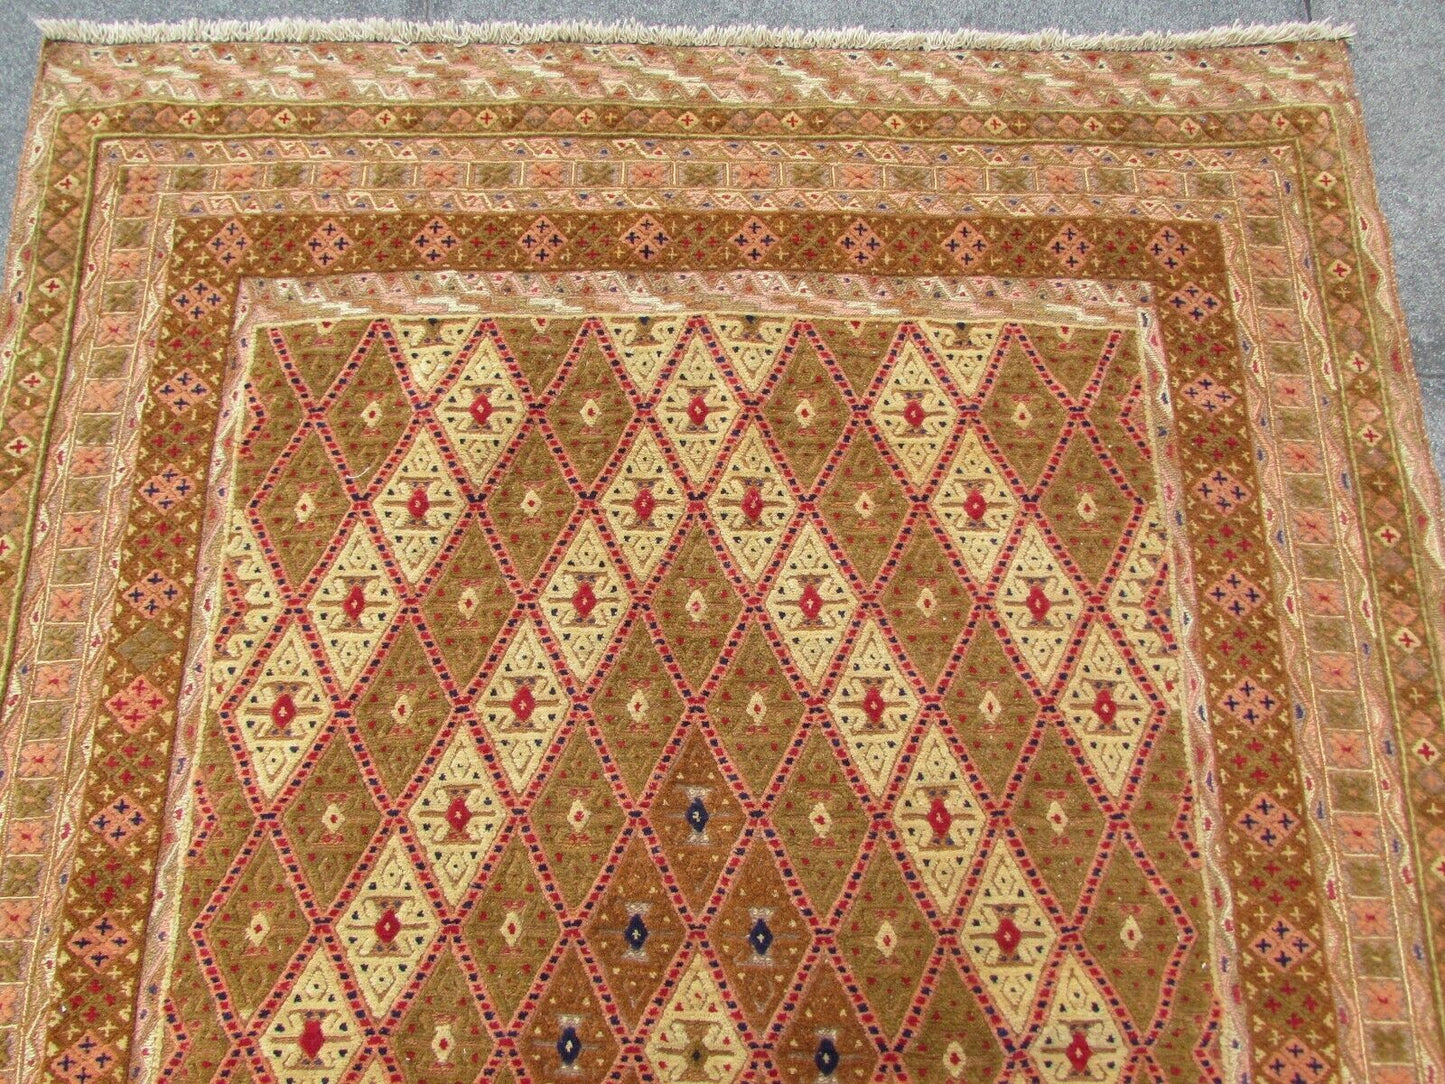 Unique cultural textile from Afghanistan